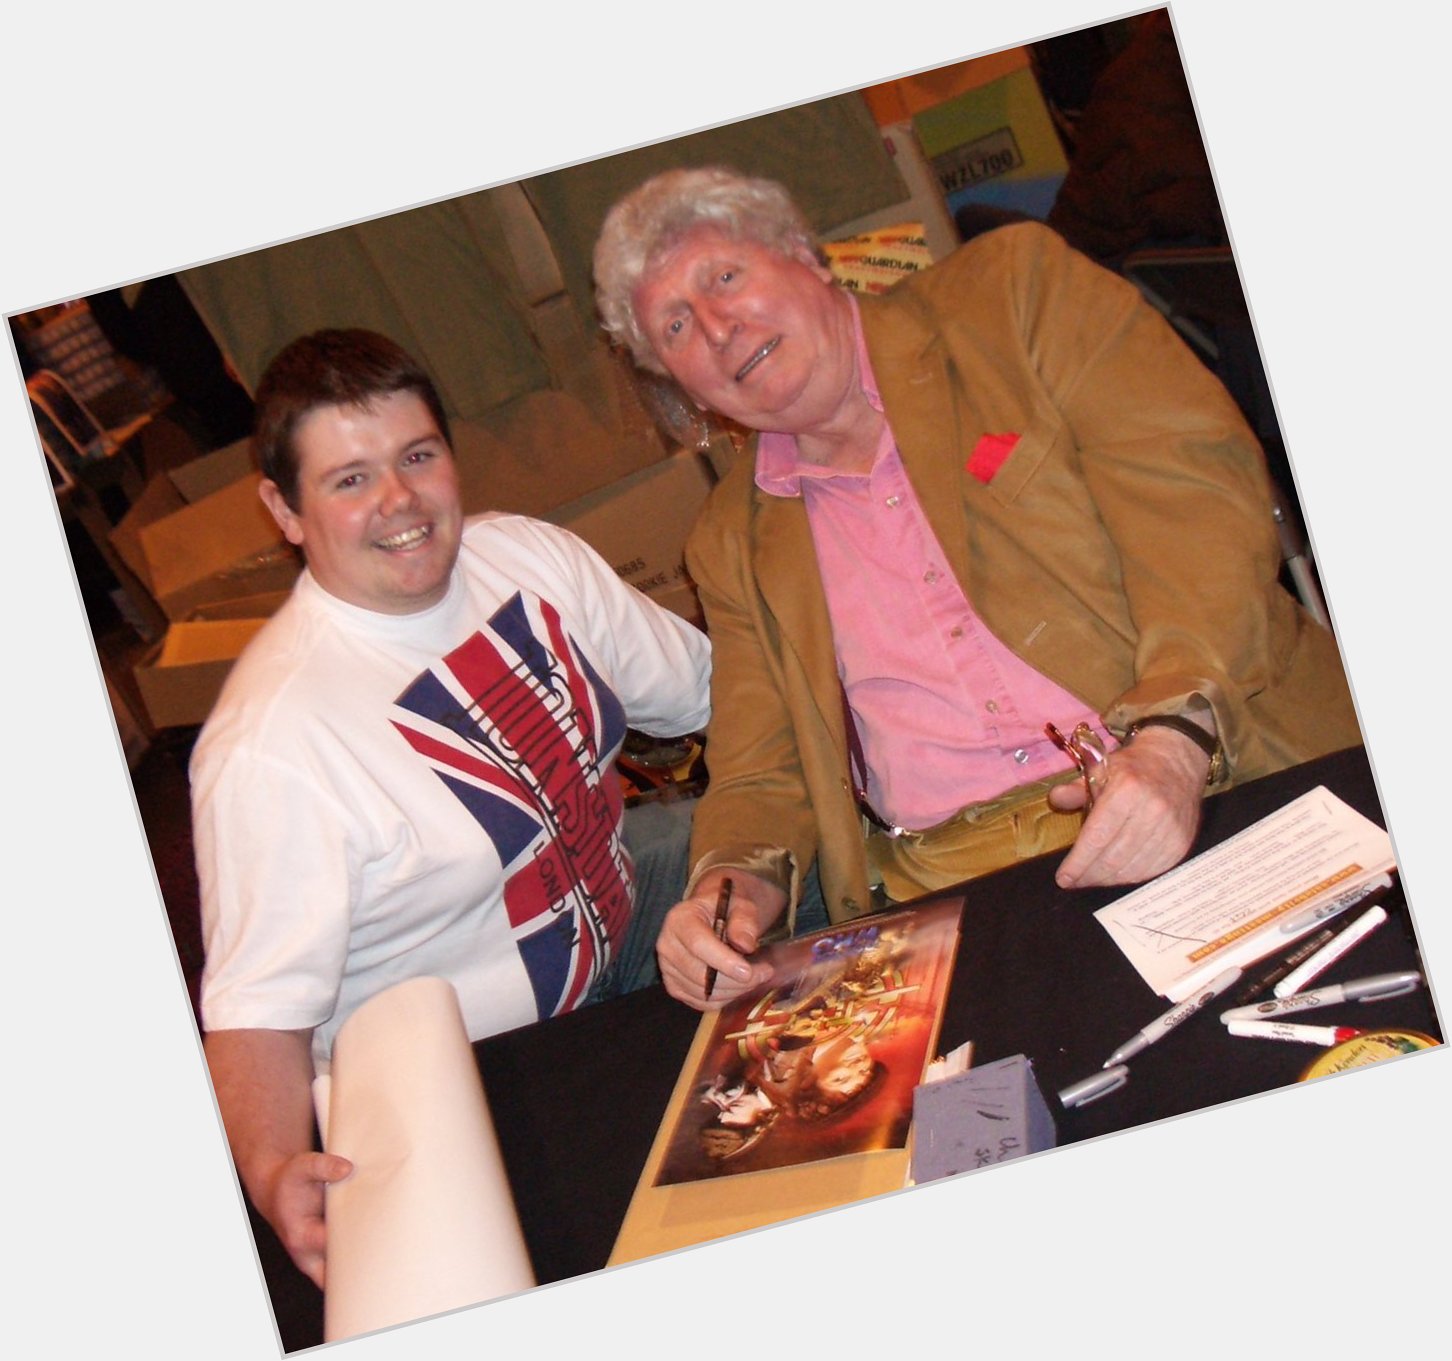 The wonderful Tom Baker and I in 2005. Happy birthday, Tom, you lovely chap. 